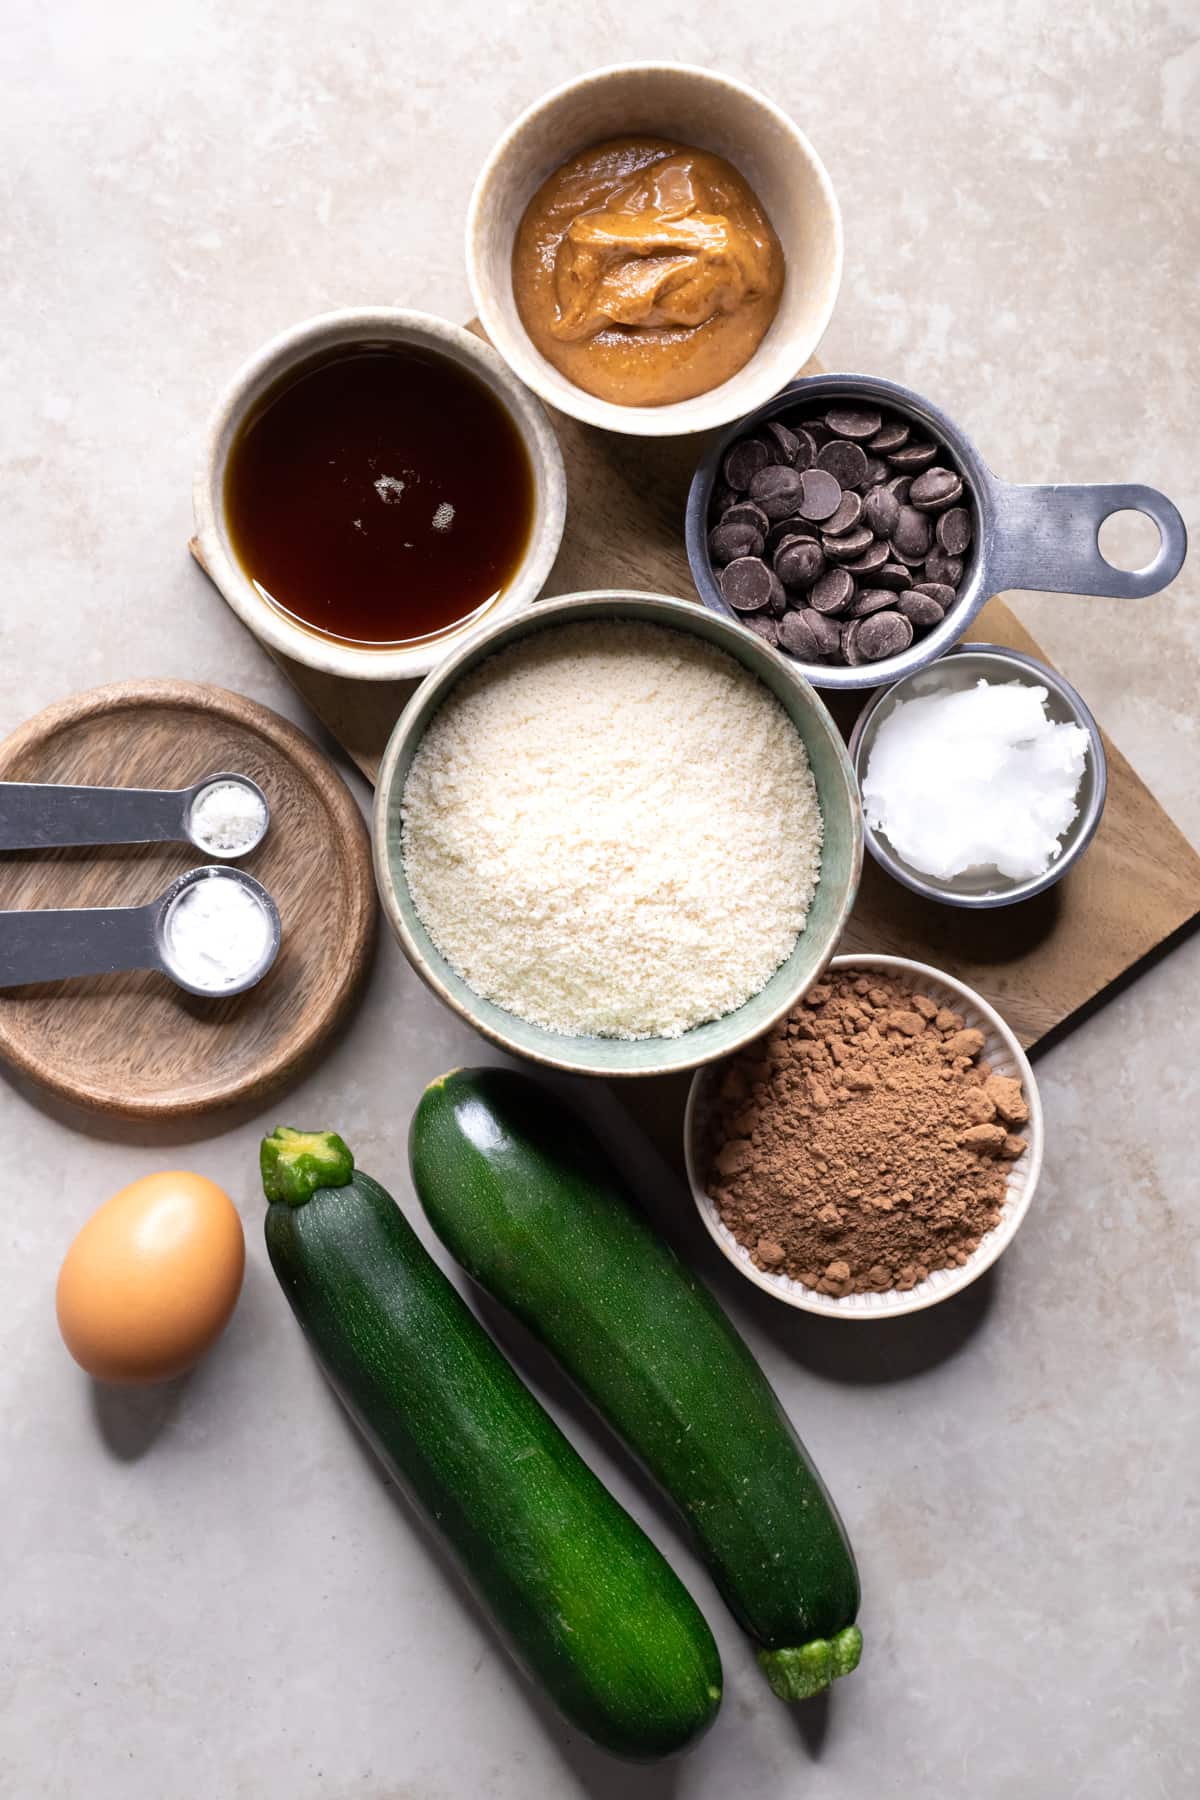 Ingredients for almond flour double chocolate zucchini muffins